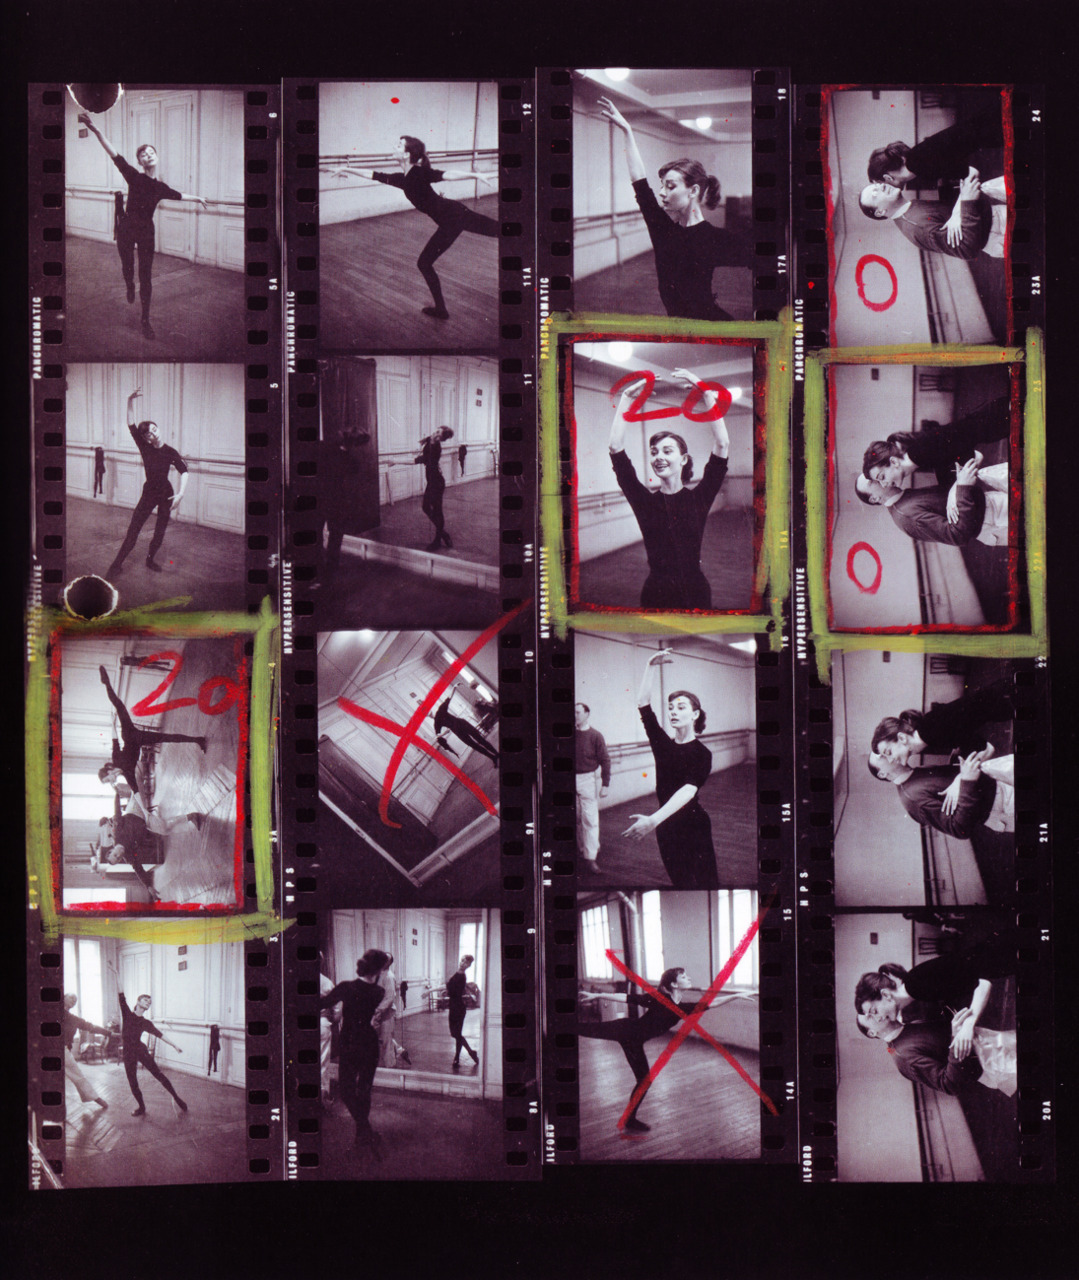 Film strips of Audrey Hepburn at a dance rehearsal for the movie Funny Face, 1956.